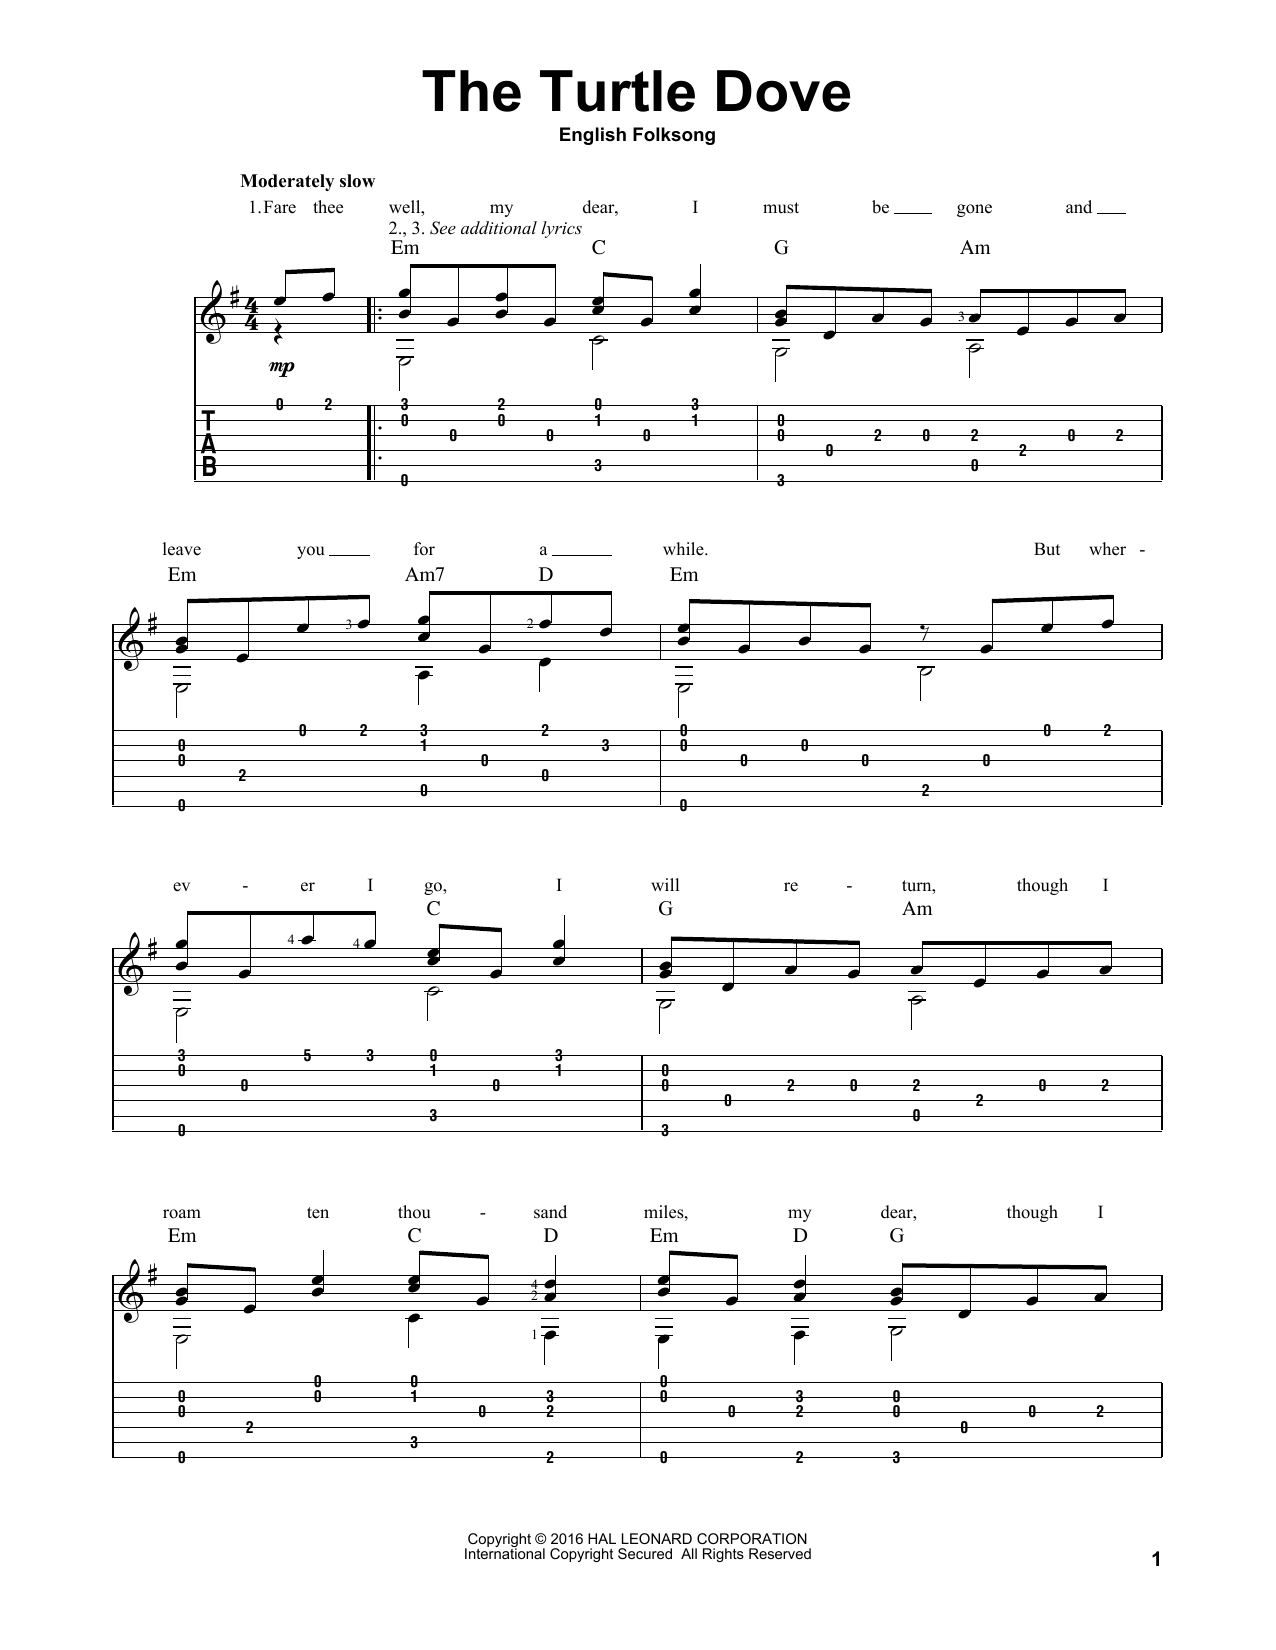 Download Traditional English Folksong The Turtle Dove Sheet Music